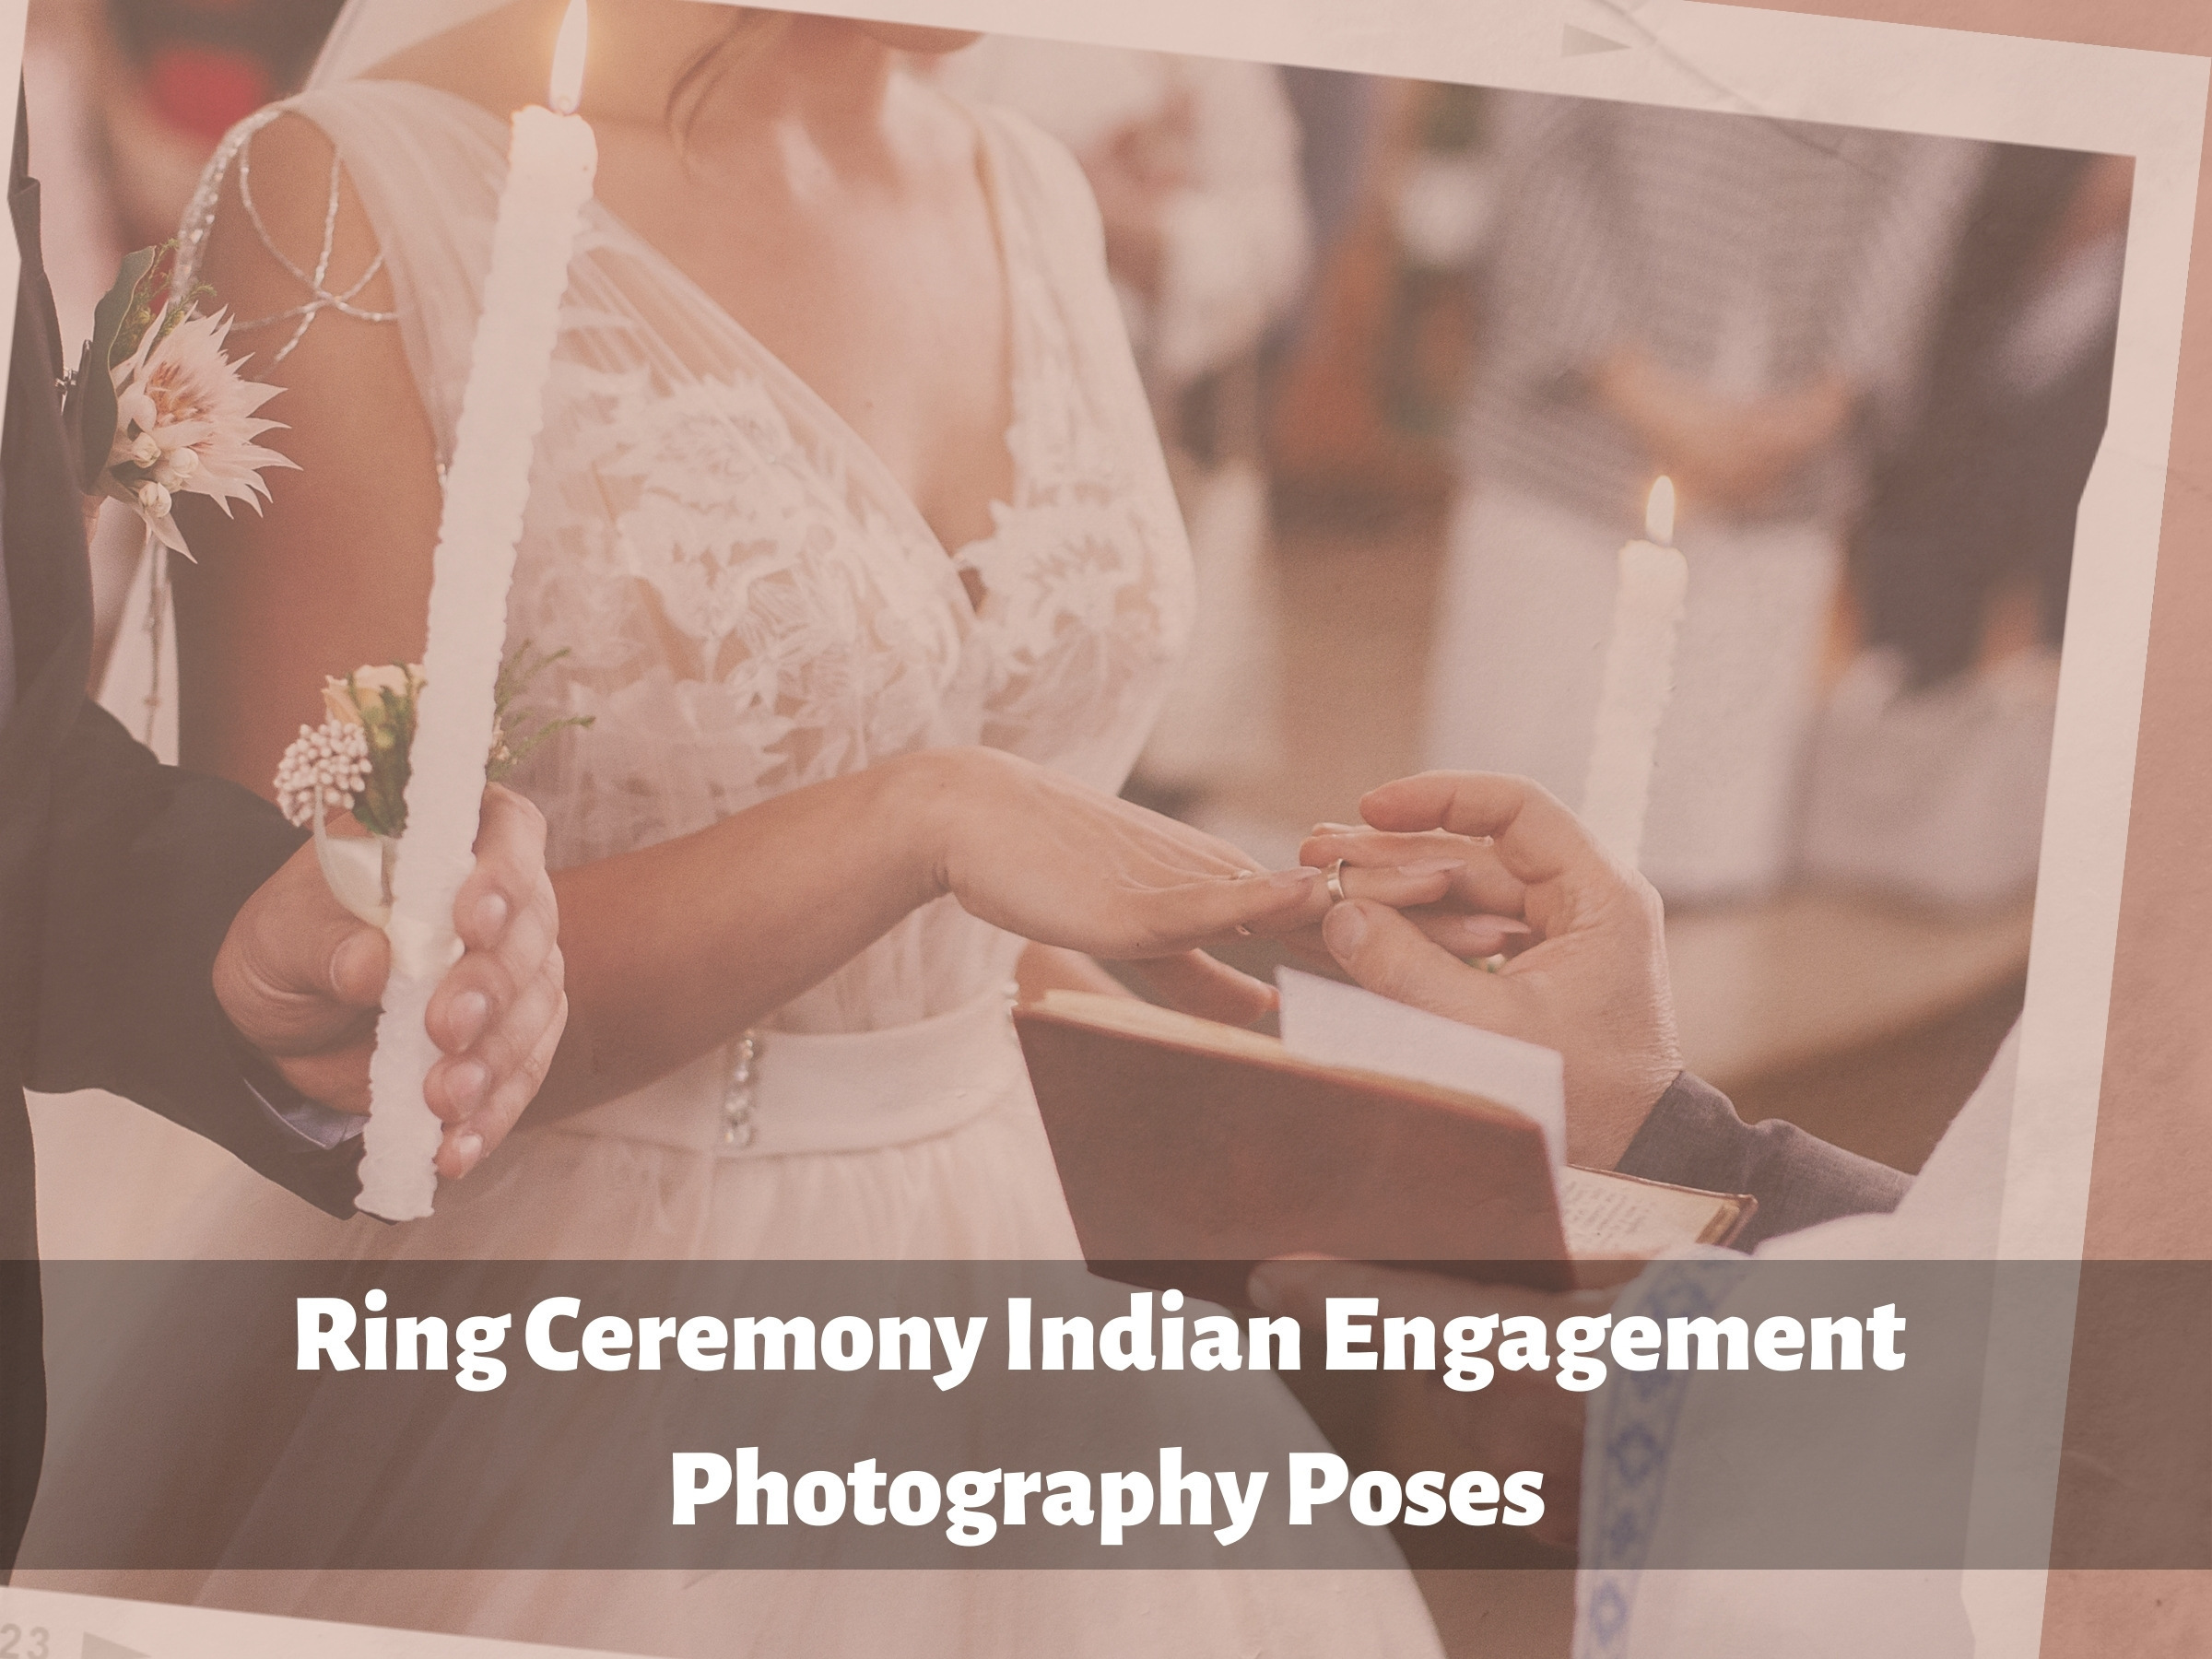 Ring Ceremony ideas and Inspiration from Groom Dress to Decoration